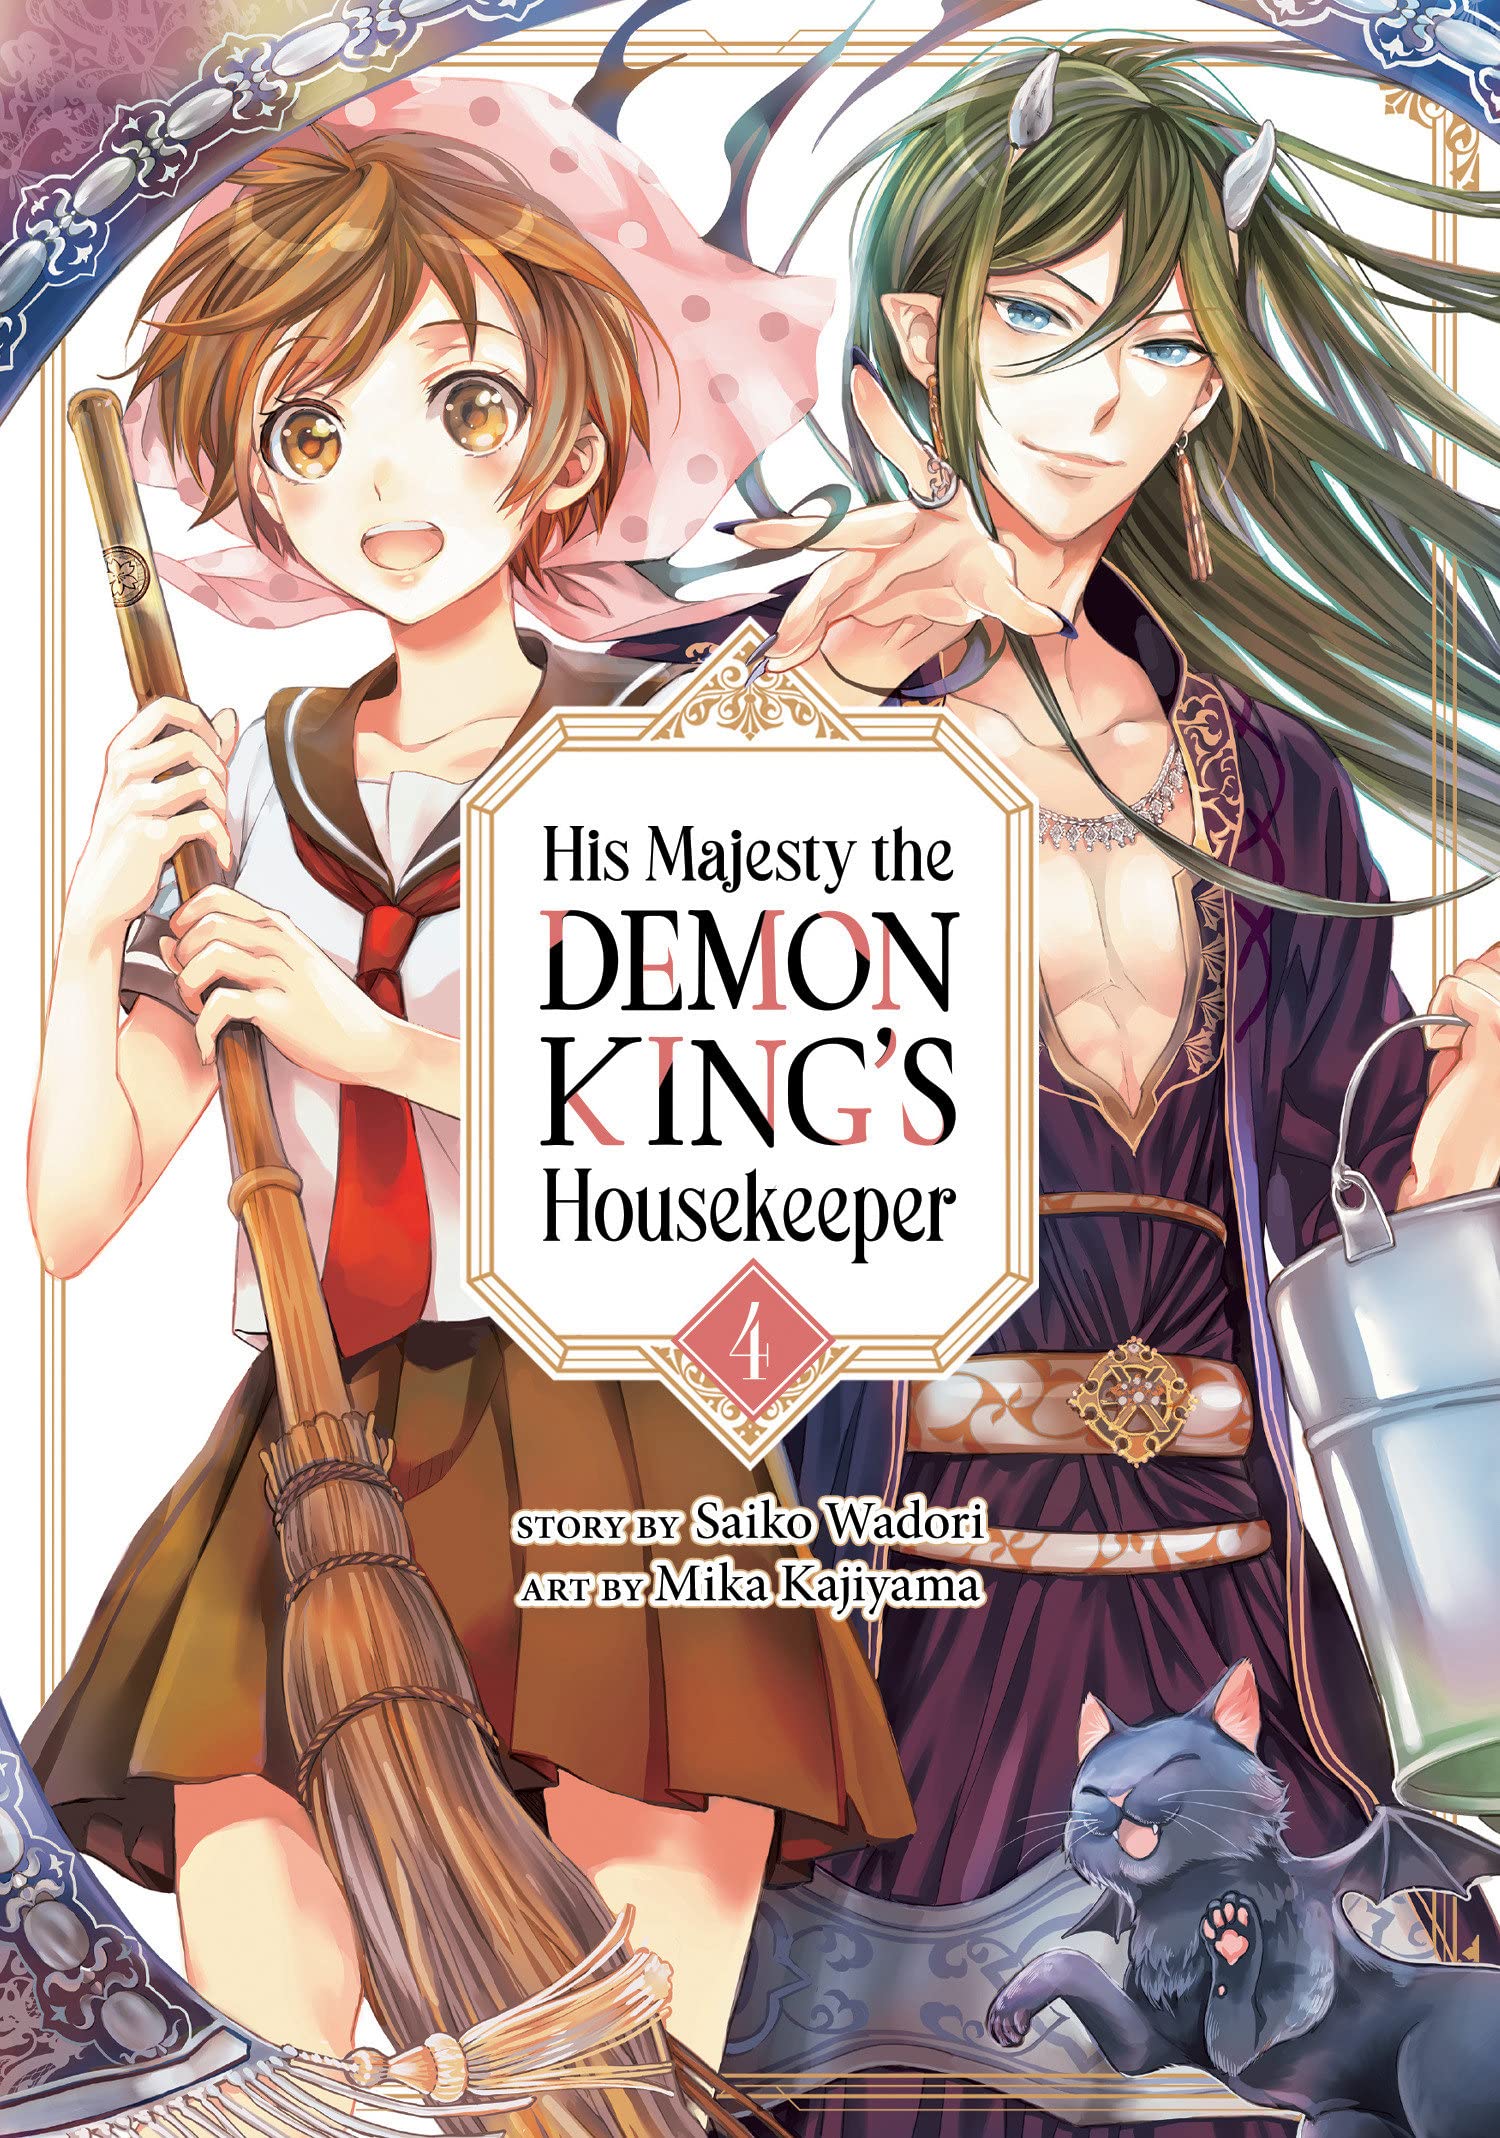 His Majesty the Demon King's Housekeeper Vol. 04